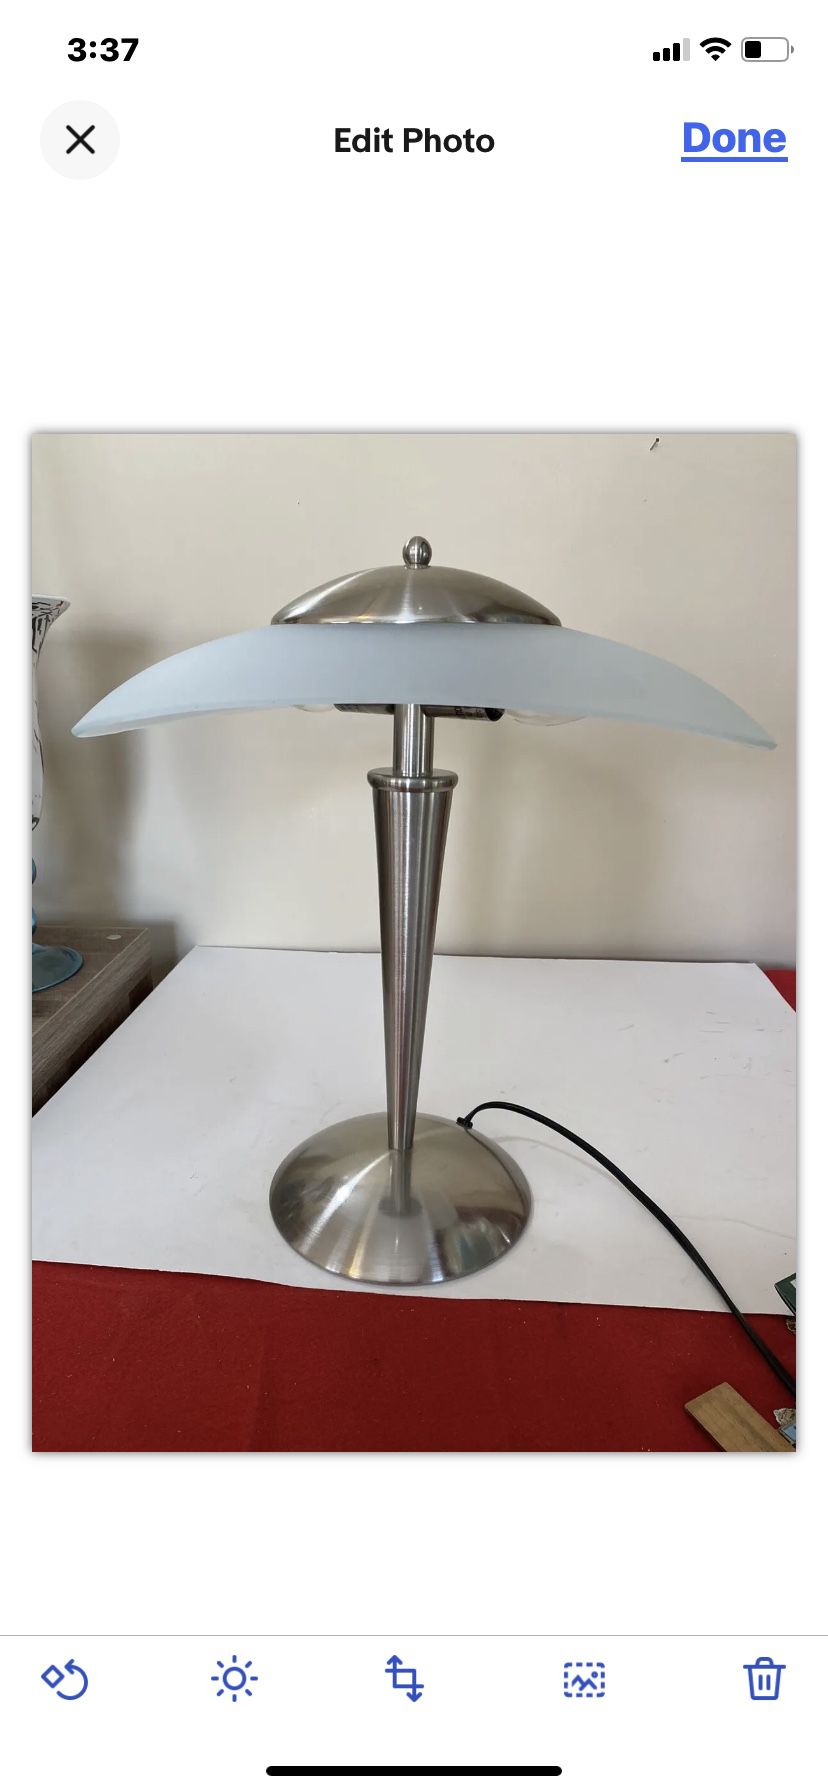 Art Deco Desk Table Lamp w Satin Nickel Base & Glass Shade. Works Perfectly